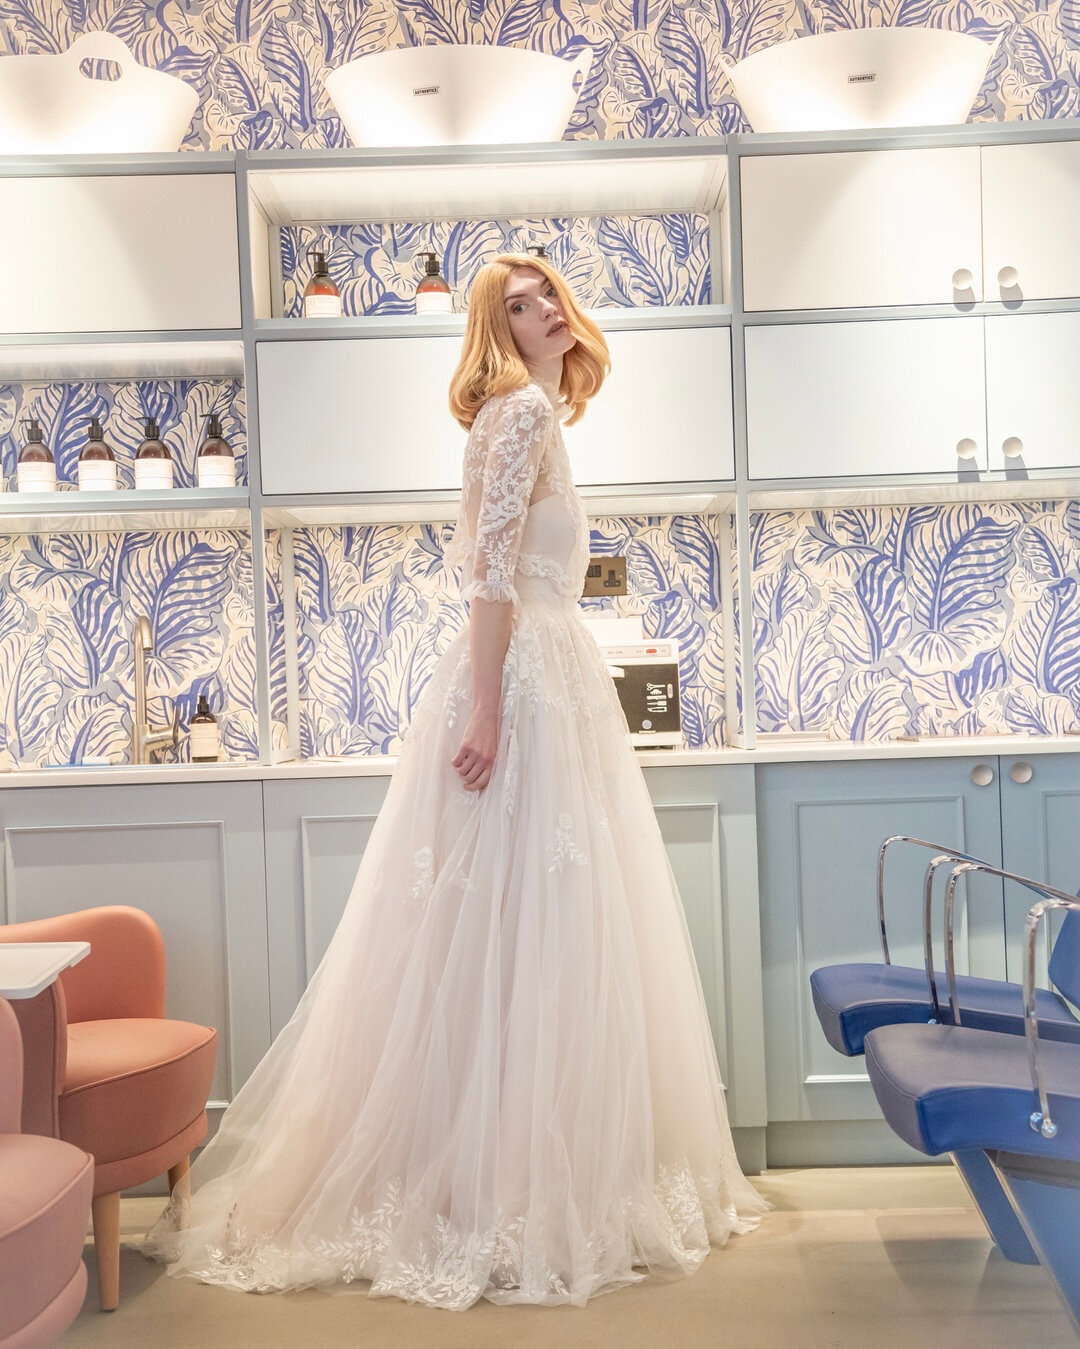 Let&rsquo;s face it. Wedding dress shopping is one of the most dreamy moments in a girl&rsquo;s life. It should be perfect!​​​​​​​​
​​​​​​​​
However, choosing &lsquo;the perfect dress&rsquo; can be extremely overwhelming. Besides lists of Do&rsquo;s 